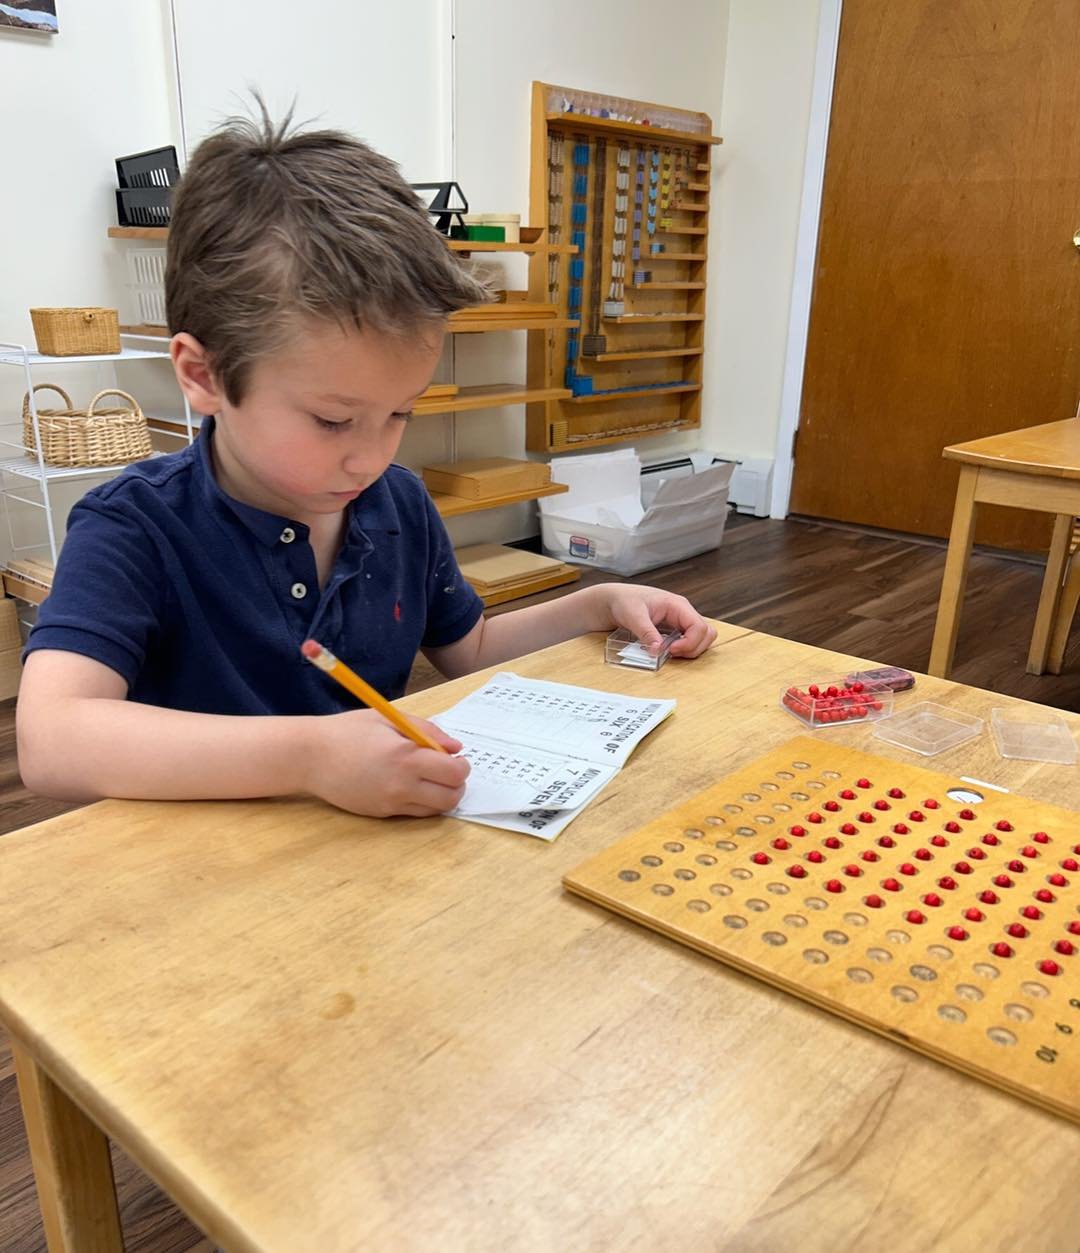 As we&rsquo;re coming closer to the end of the school year, many &ldquo;big works&rdquo; take place in our preschool classrooms. Children thrive in their daily routine, deeply engage in activities and are capable of so much more than they were when s